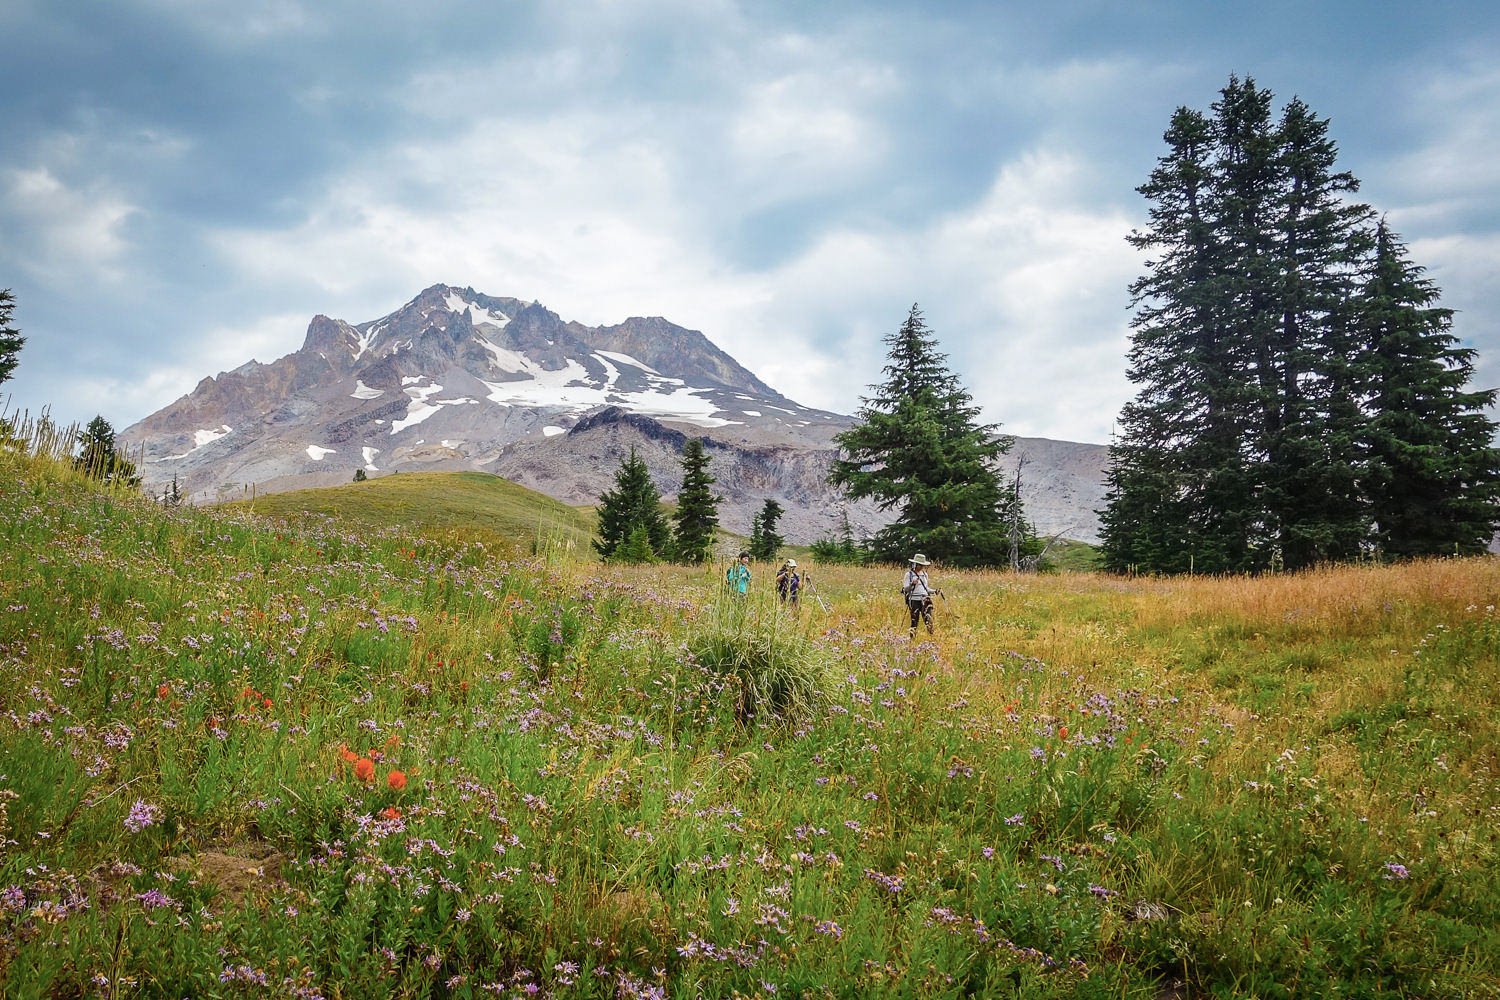 Distant hikers walking through a wildflower meadow on the Timberline Trail.